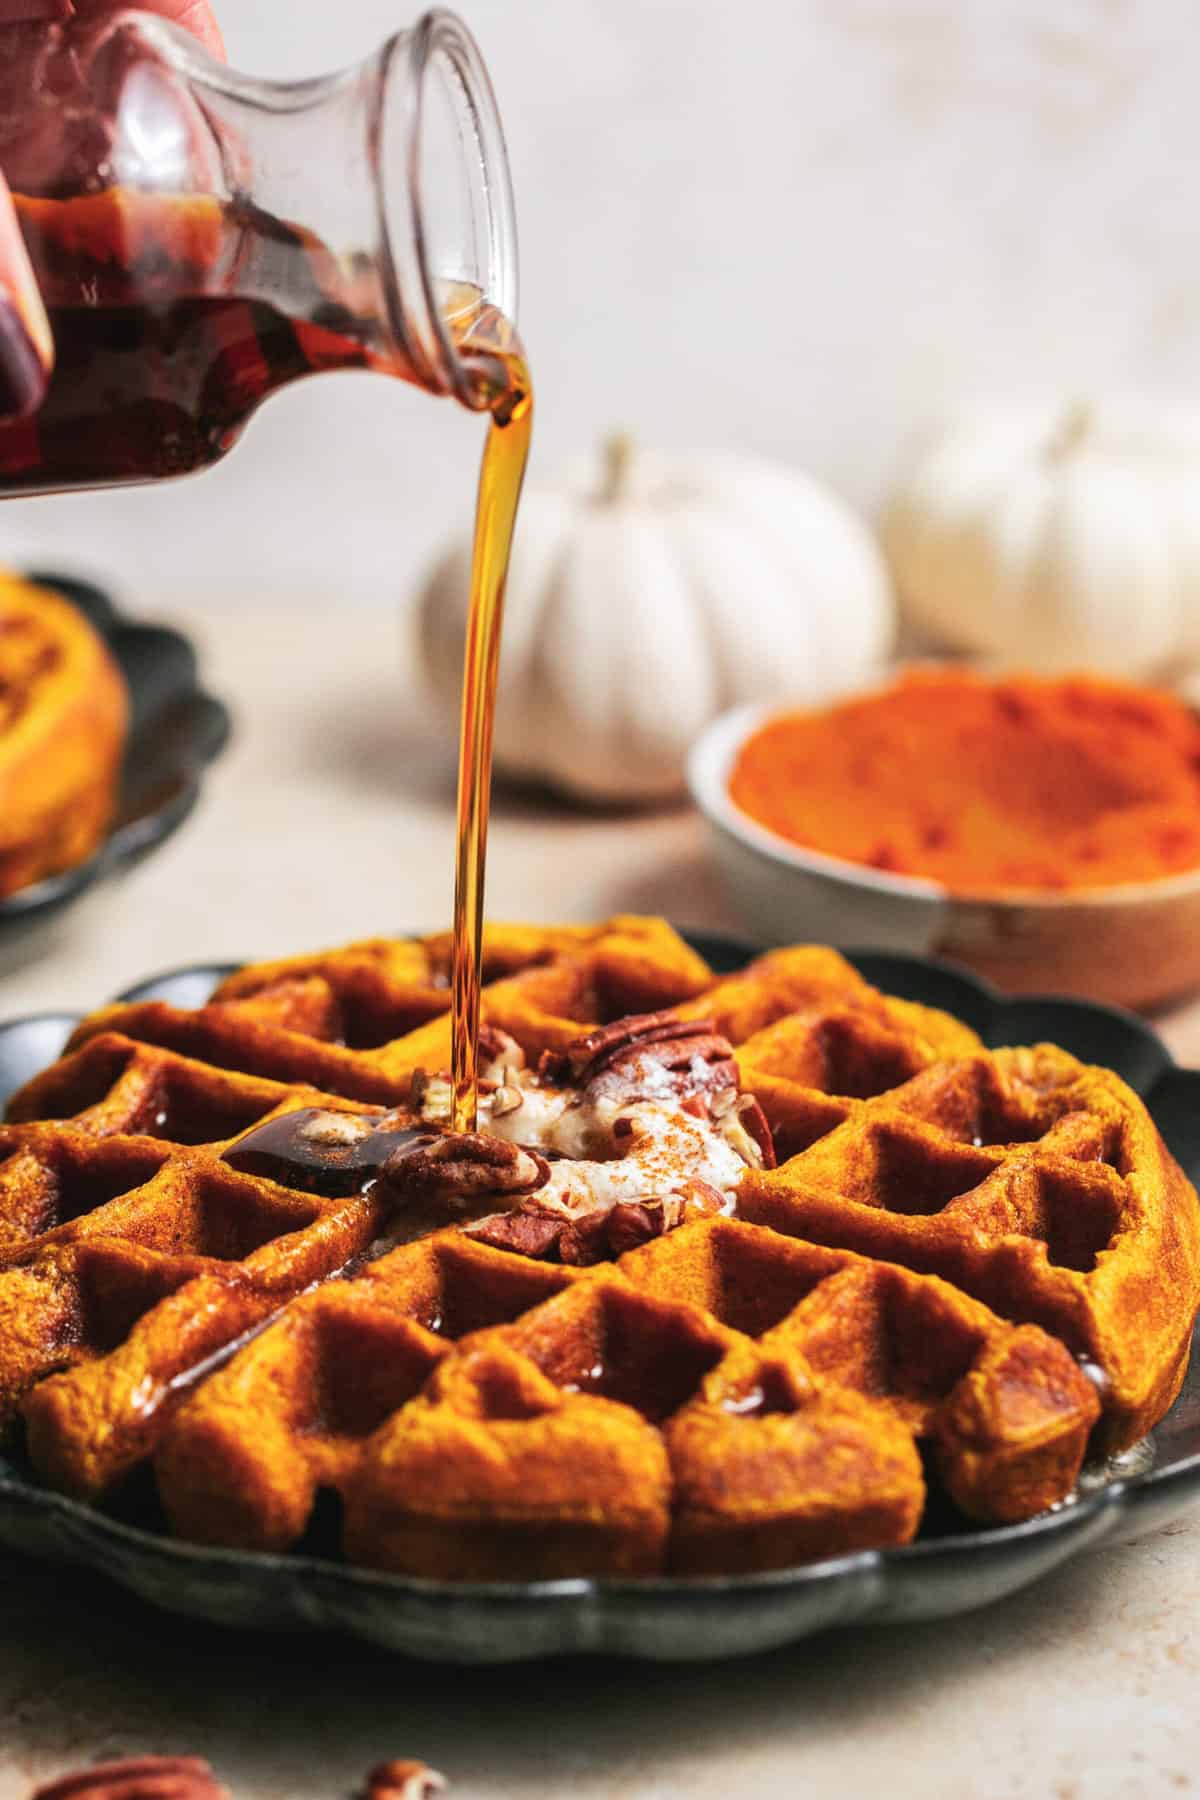 syrup pouring onto pumpkin waffle on plate